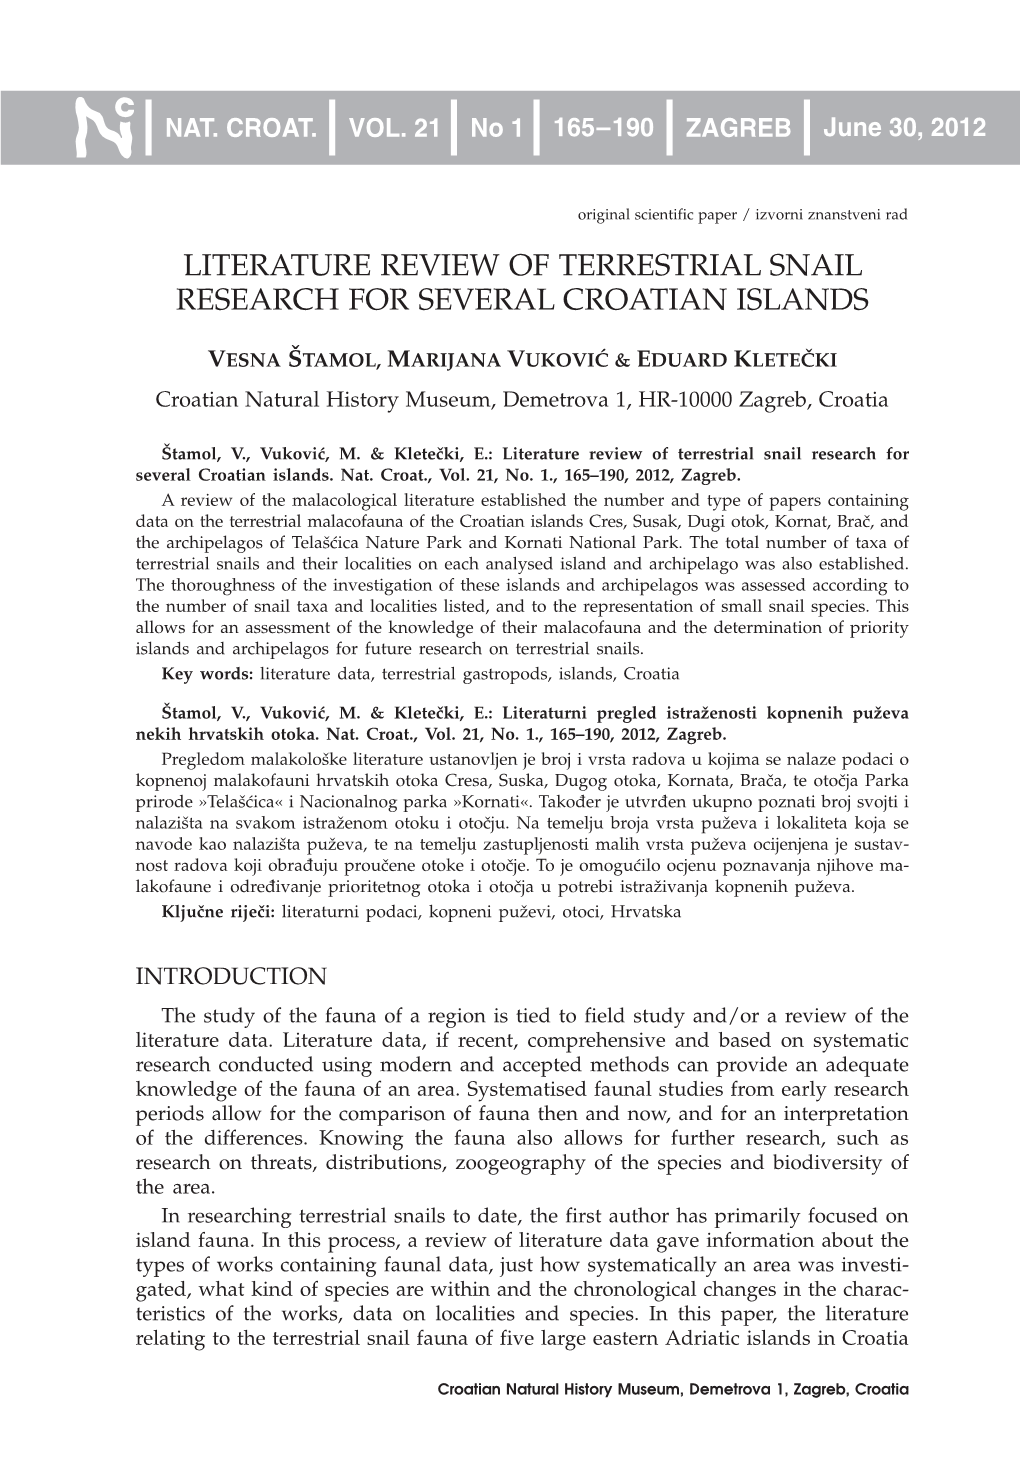 Literature Review of Terrestrial Snail Research for Several Croatian Islands